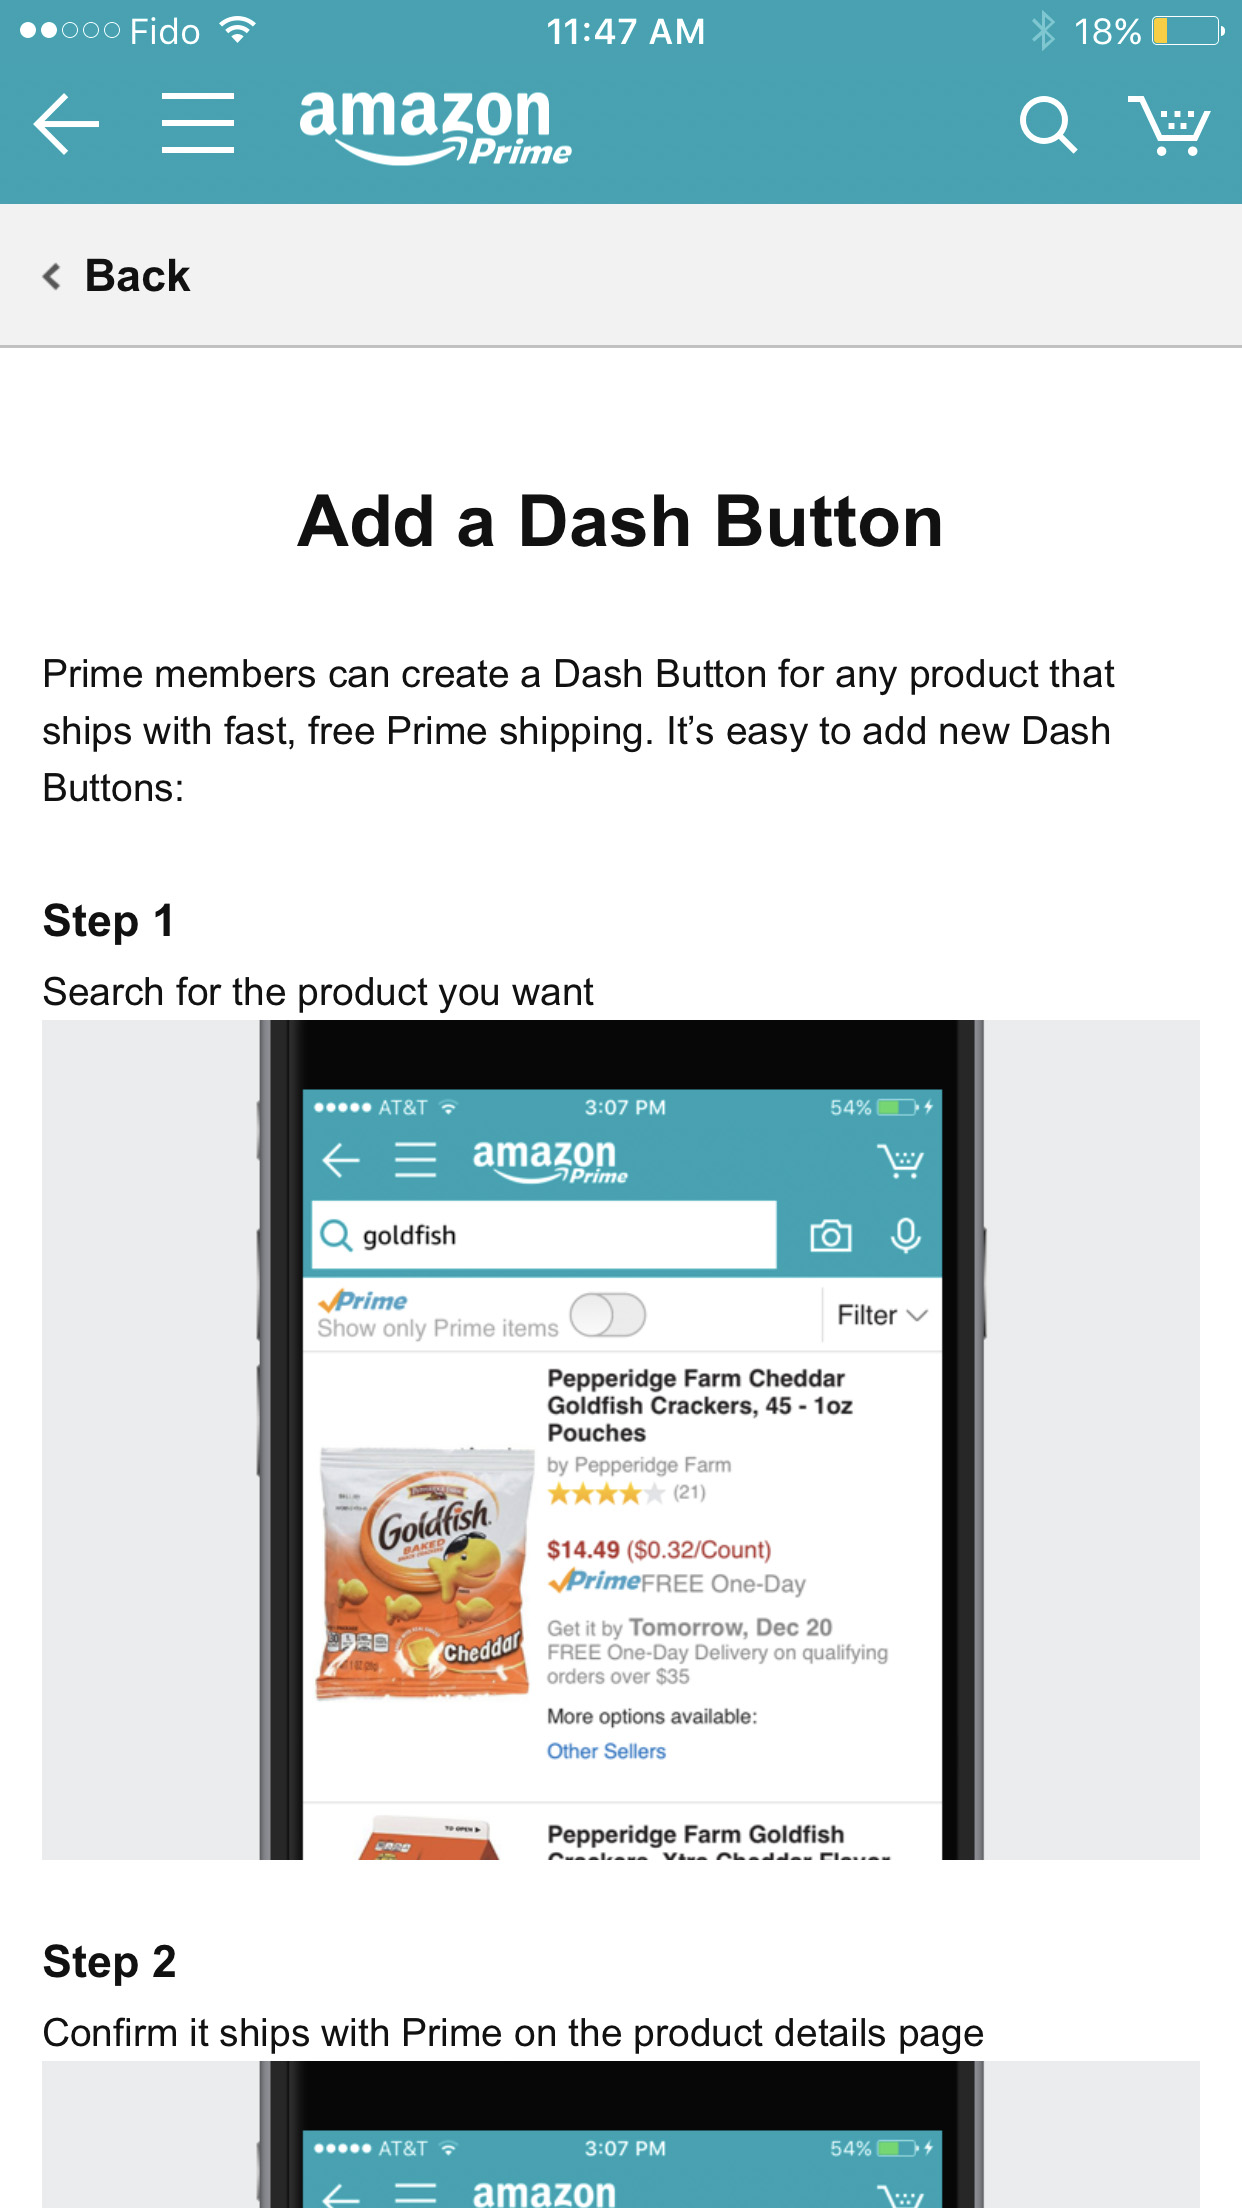 Amazon Launches Virtual Dash Buttons for Web and Mobile